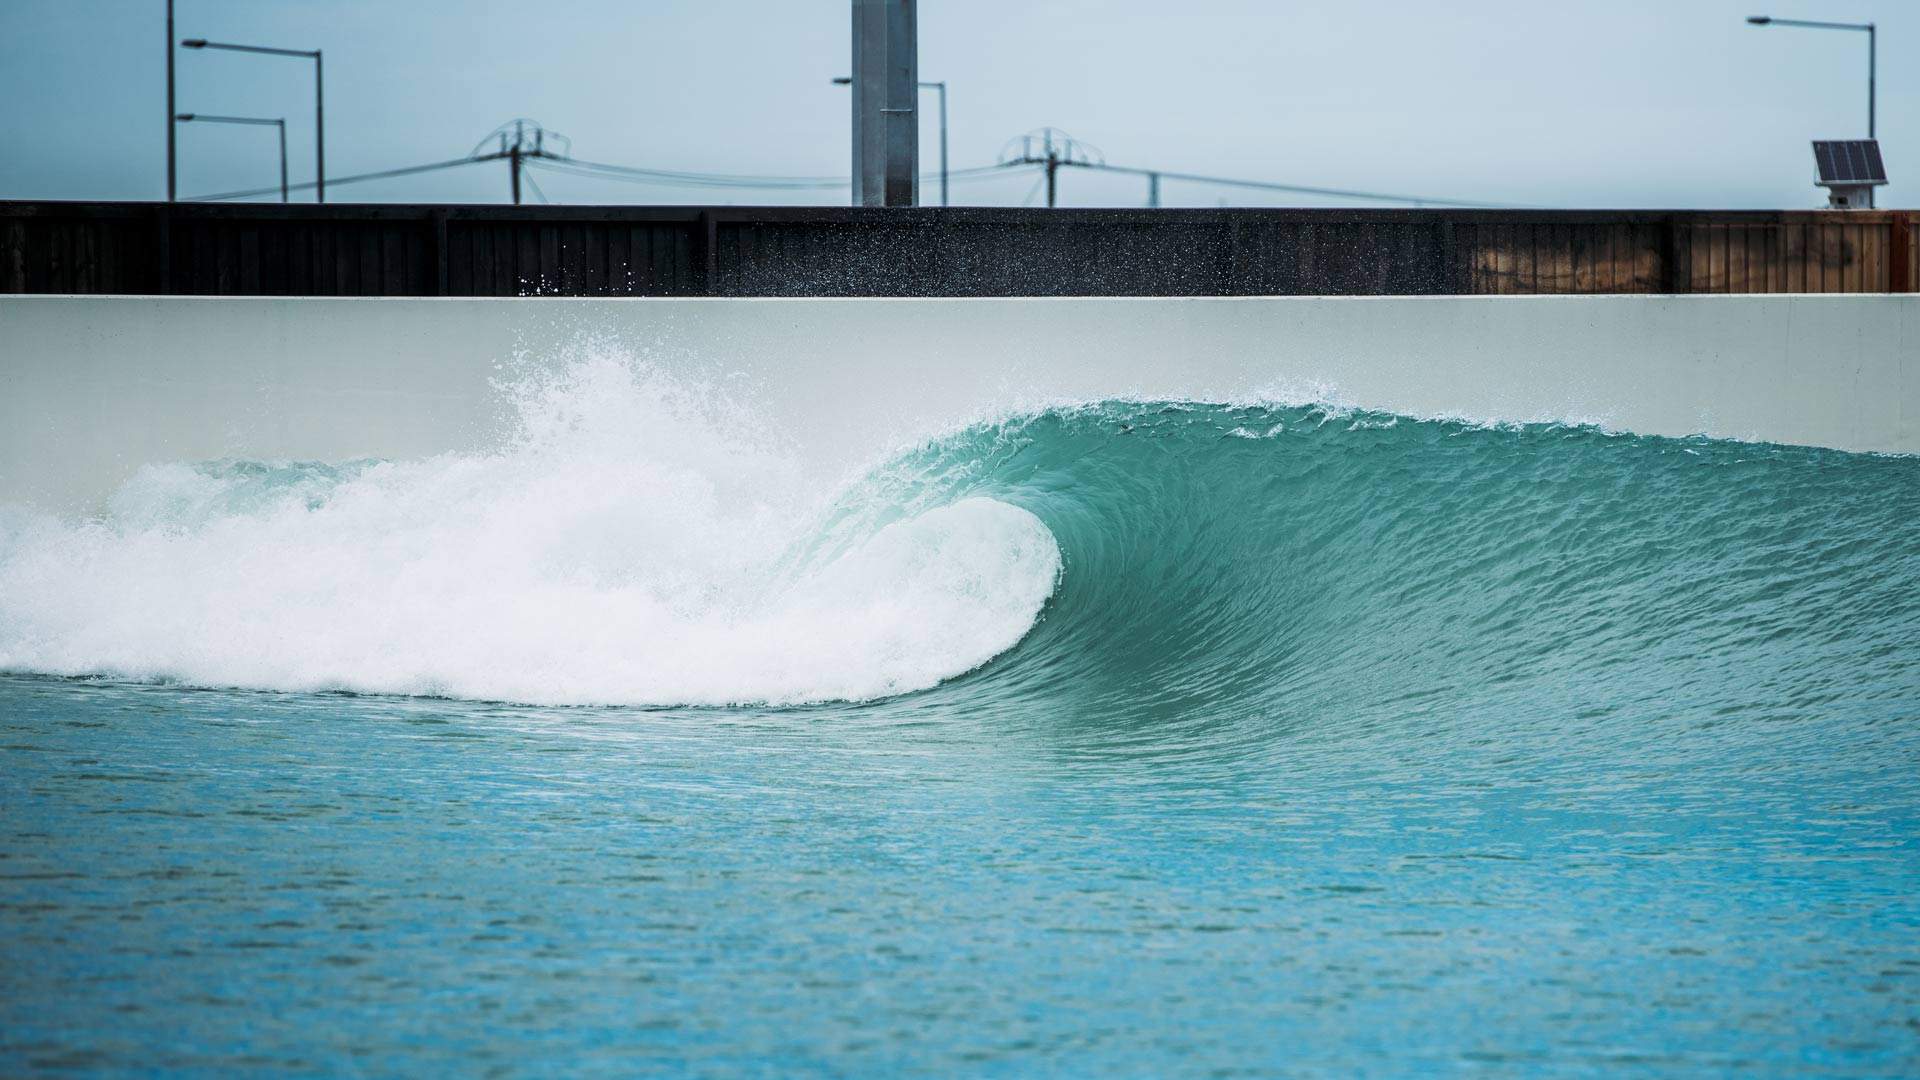 Melbourne's Long-Awaited Surf Park Urbnsurf Is Finally Pumping Out Waves